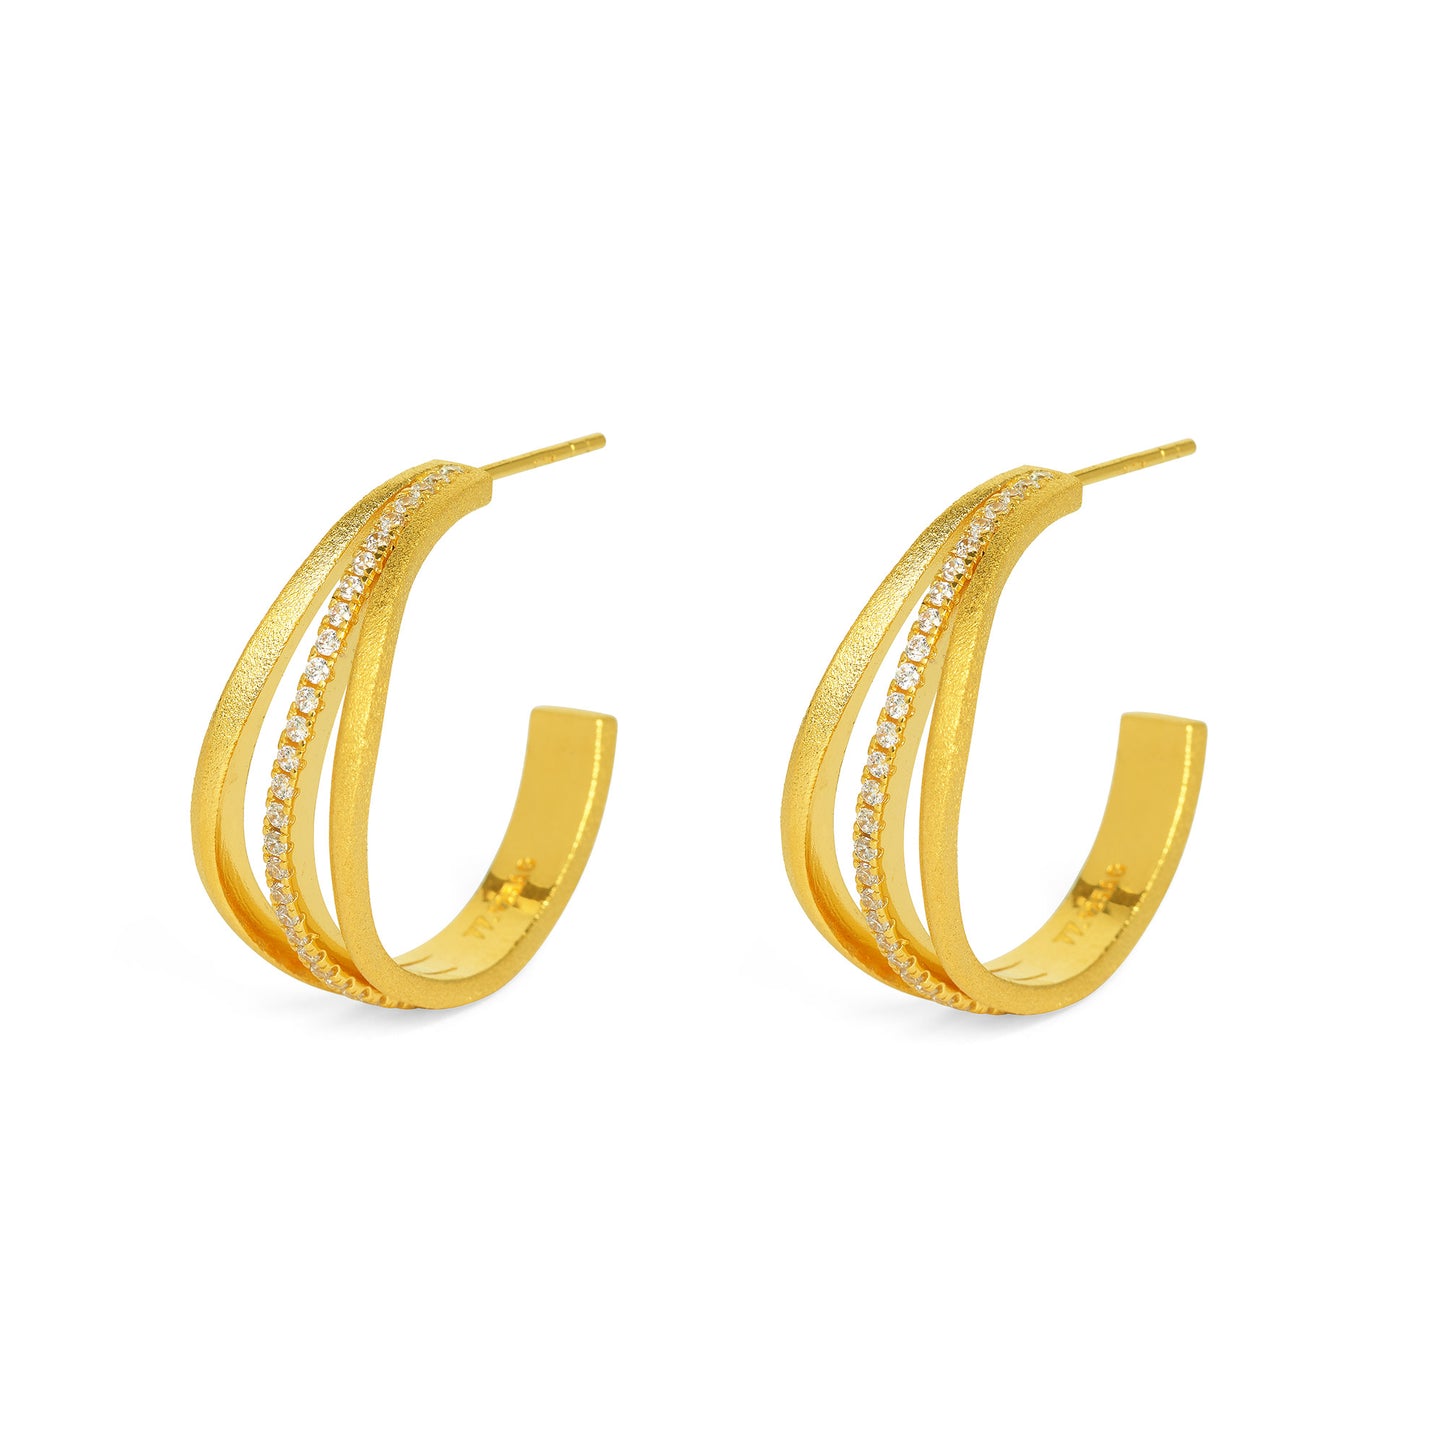 Bernd Wolf Collection "Sentros" Earrings